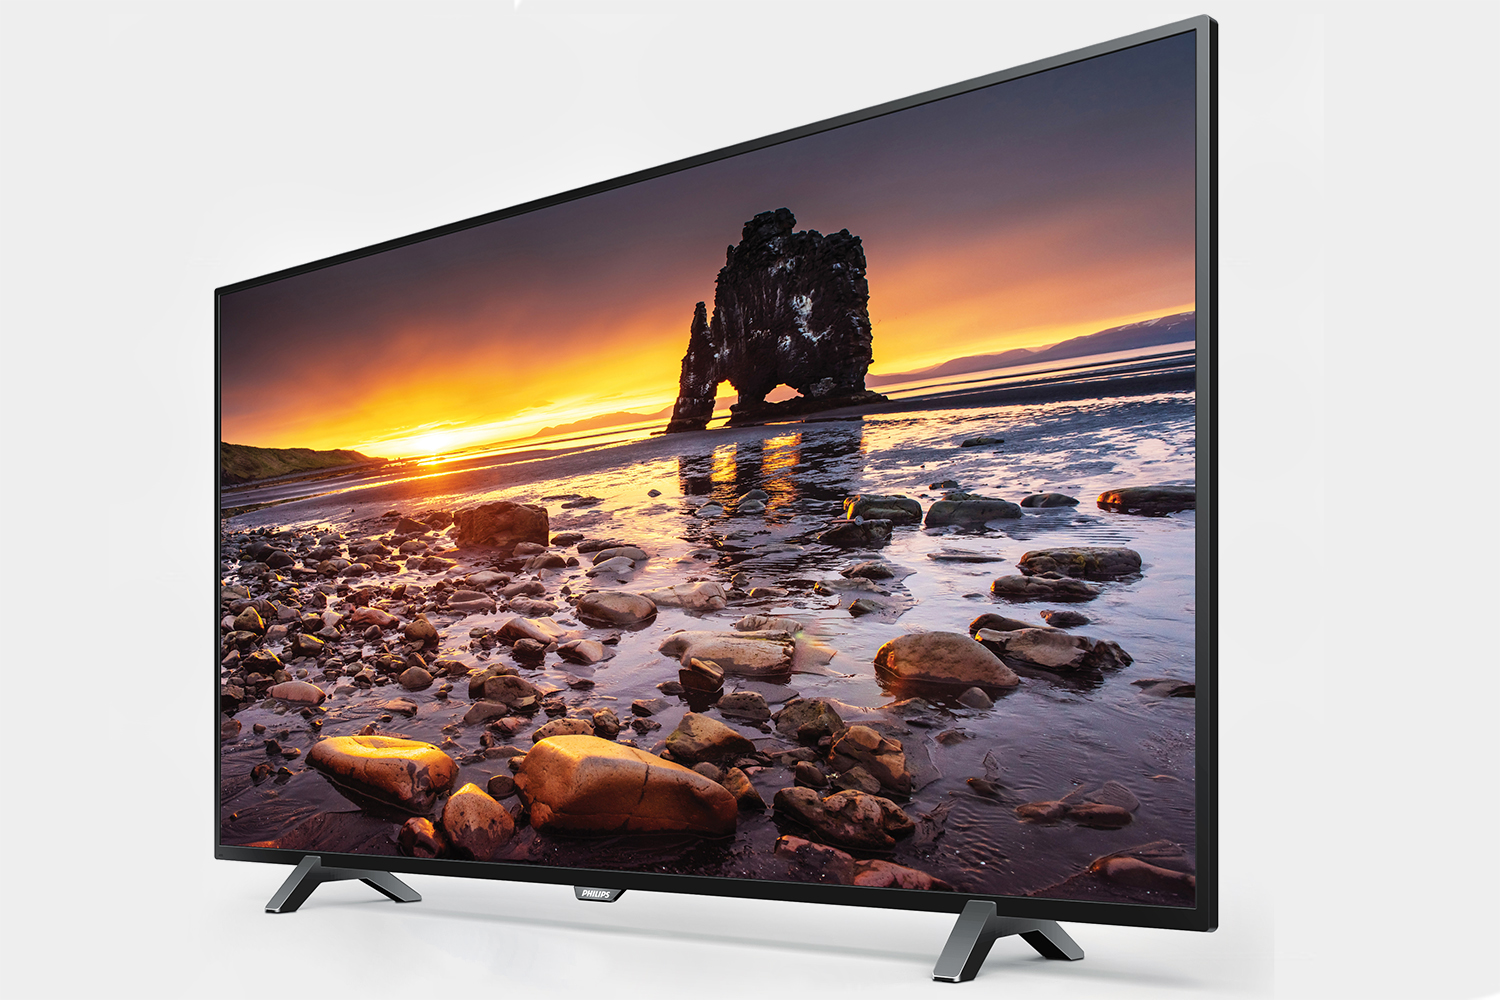 Philips 5000 Series TVs with Chromecast Built In | Digital Trends